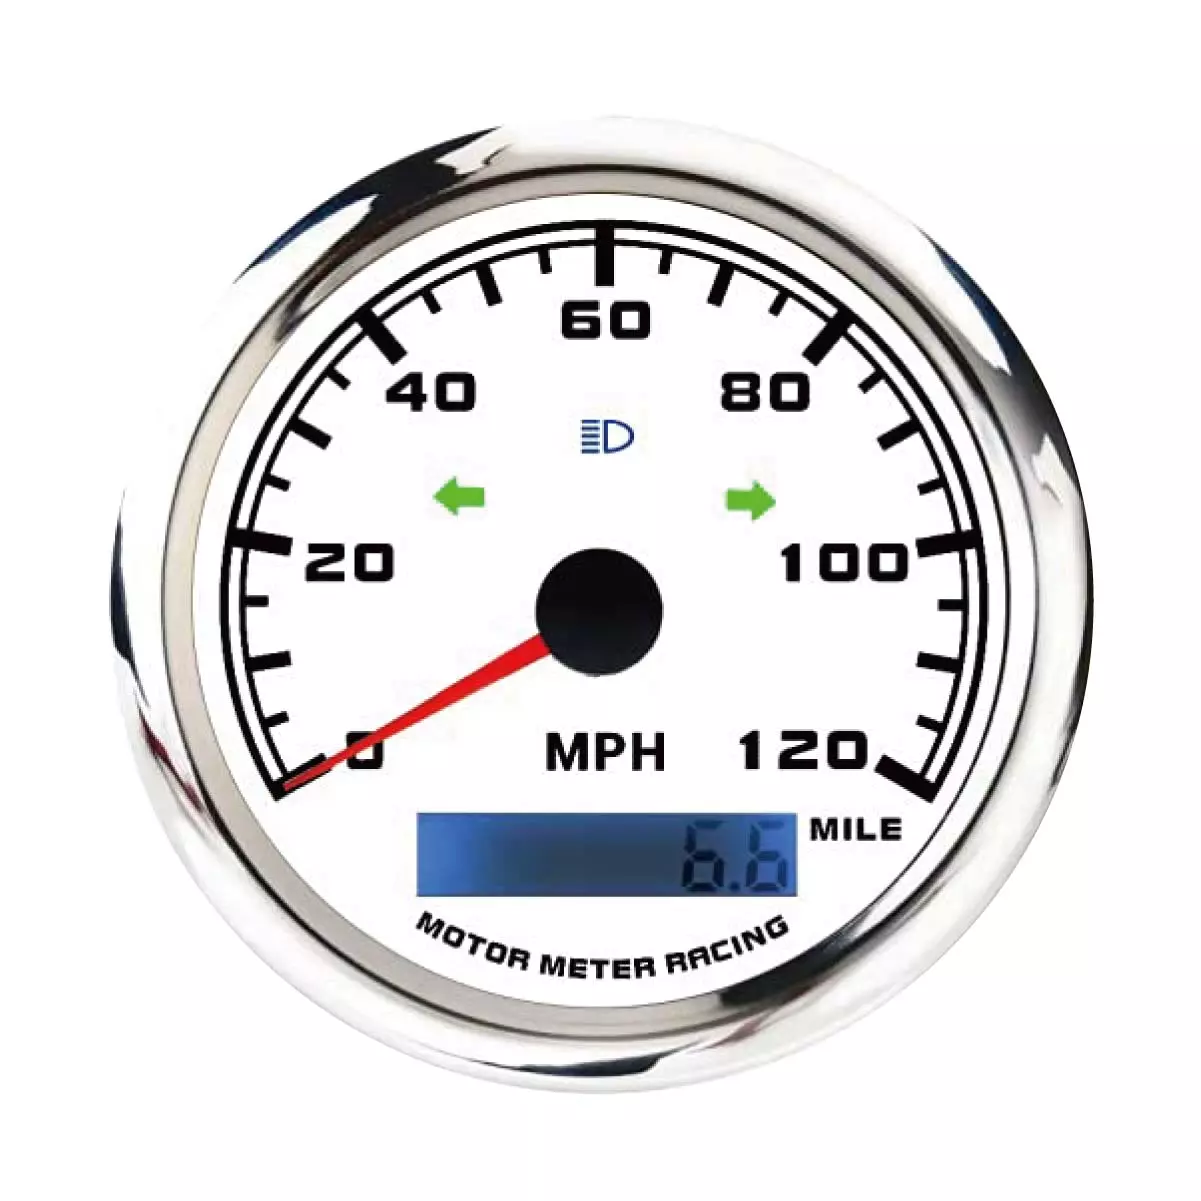 MOTOR METER RACING GPS Speedometer Odometer Waterproof for Boat Car Truck Motorcycle with LED Backlight Turn Signal High Beam 120 Mph White Dial 12V 3-3/8" 85mm